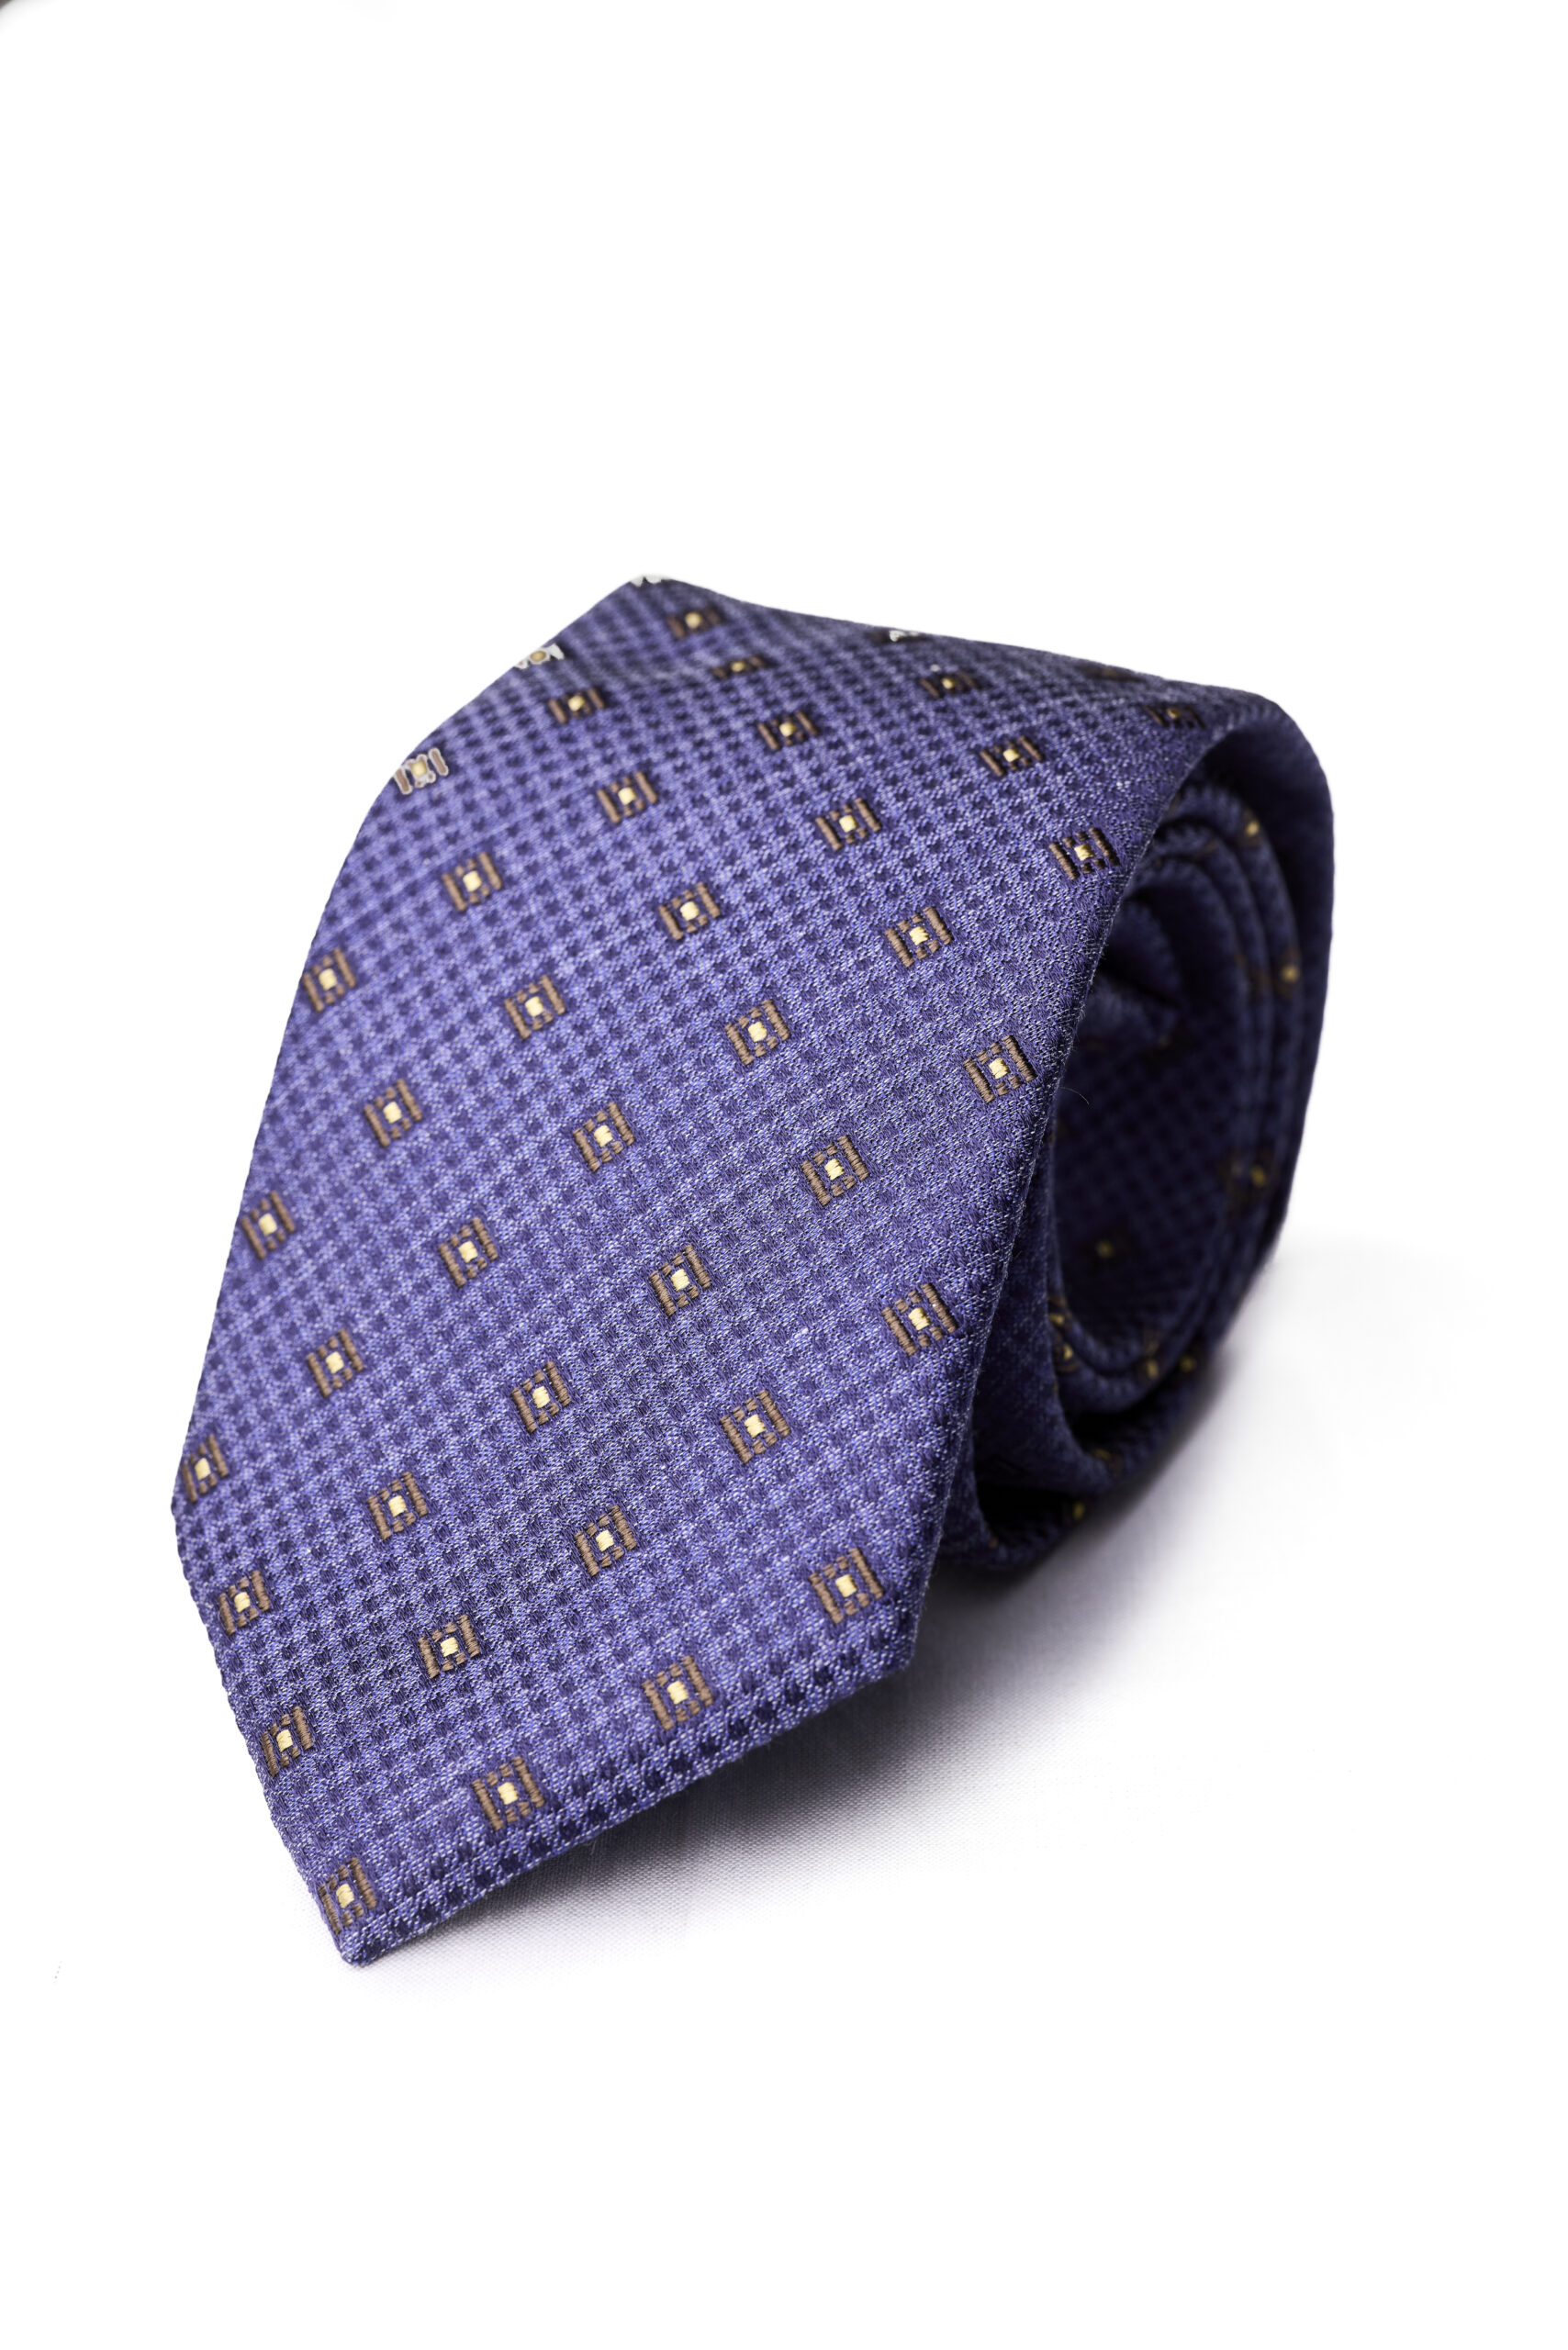 A purple tie with brown squares on it